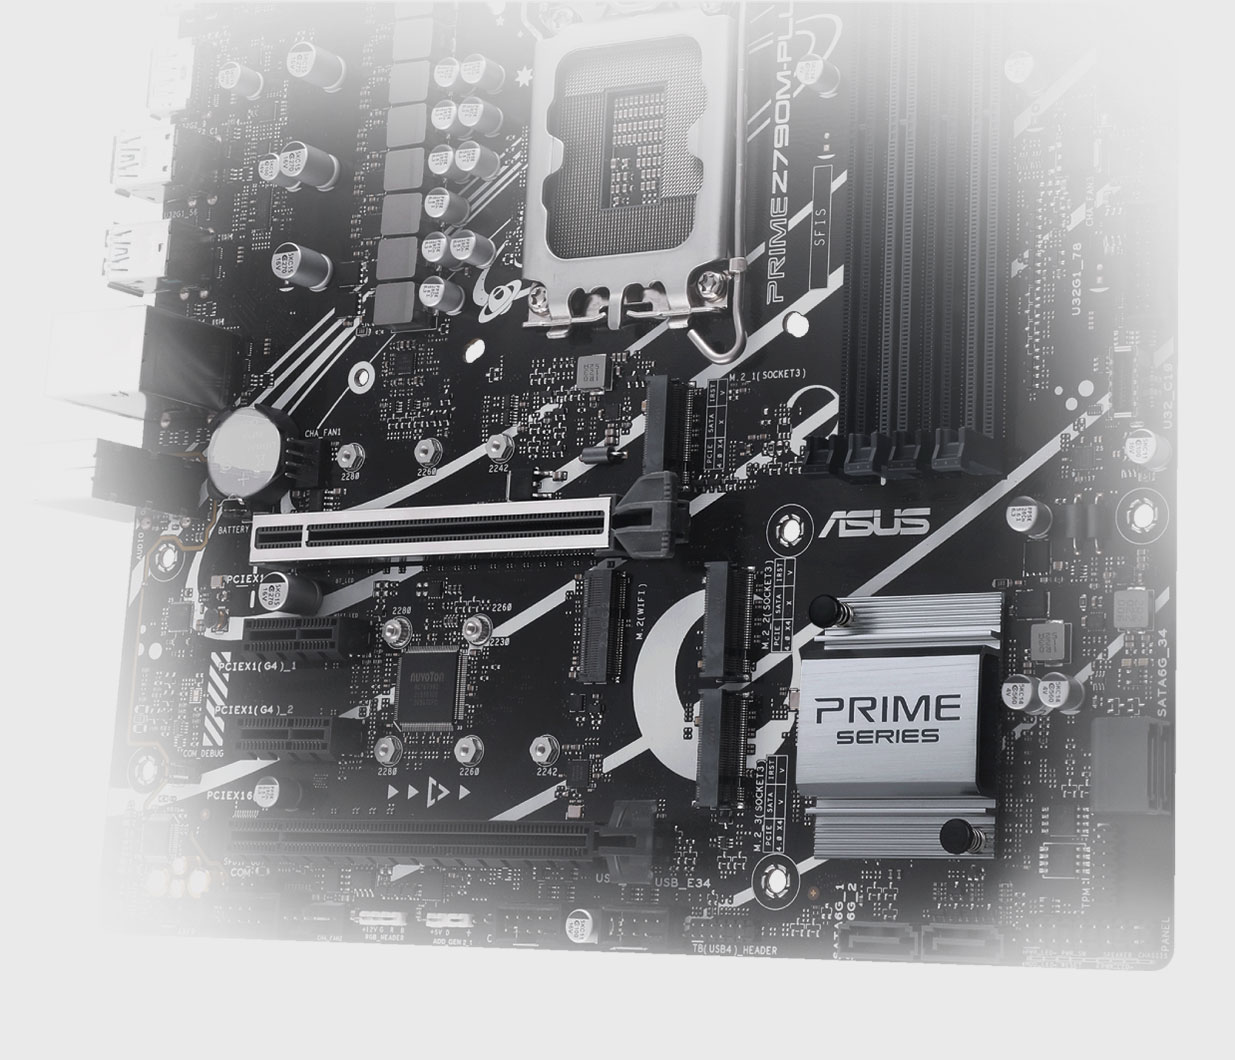 The PRIME Z790M-PLUS-CSM motherboard supports three M.2 slots.